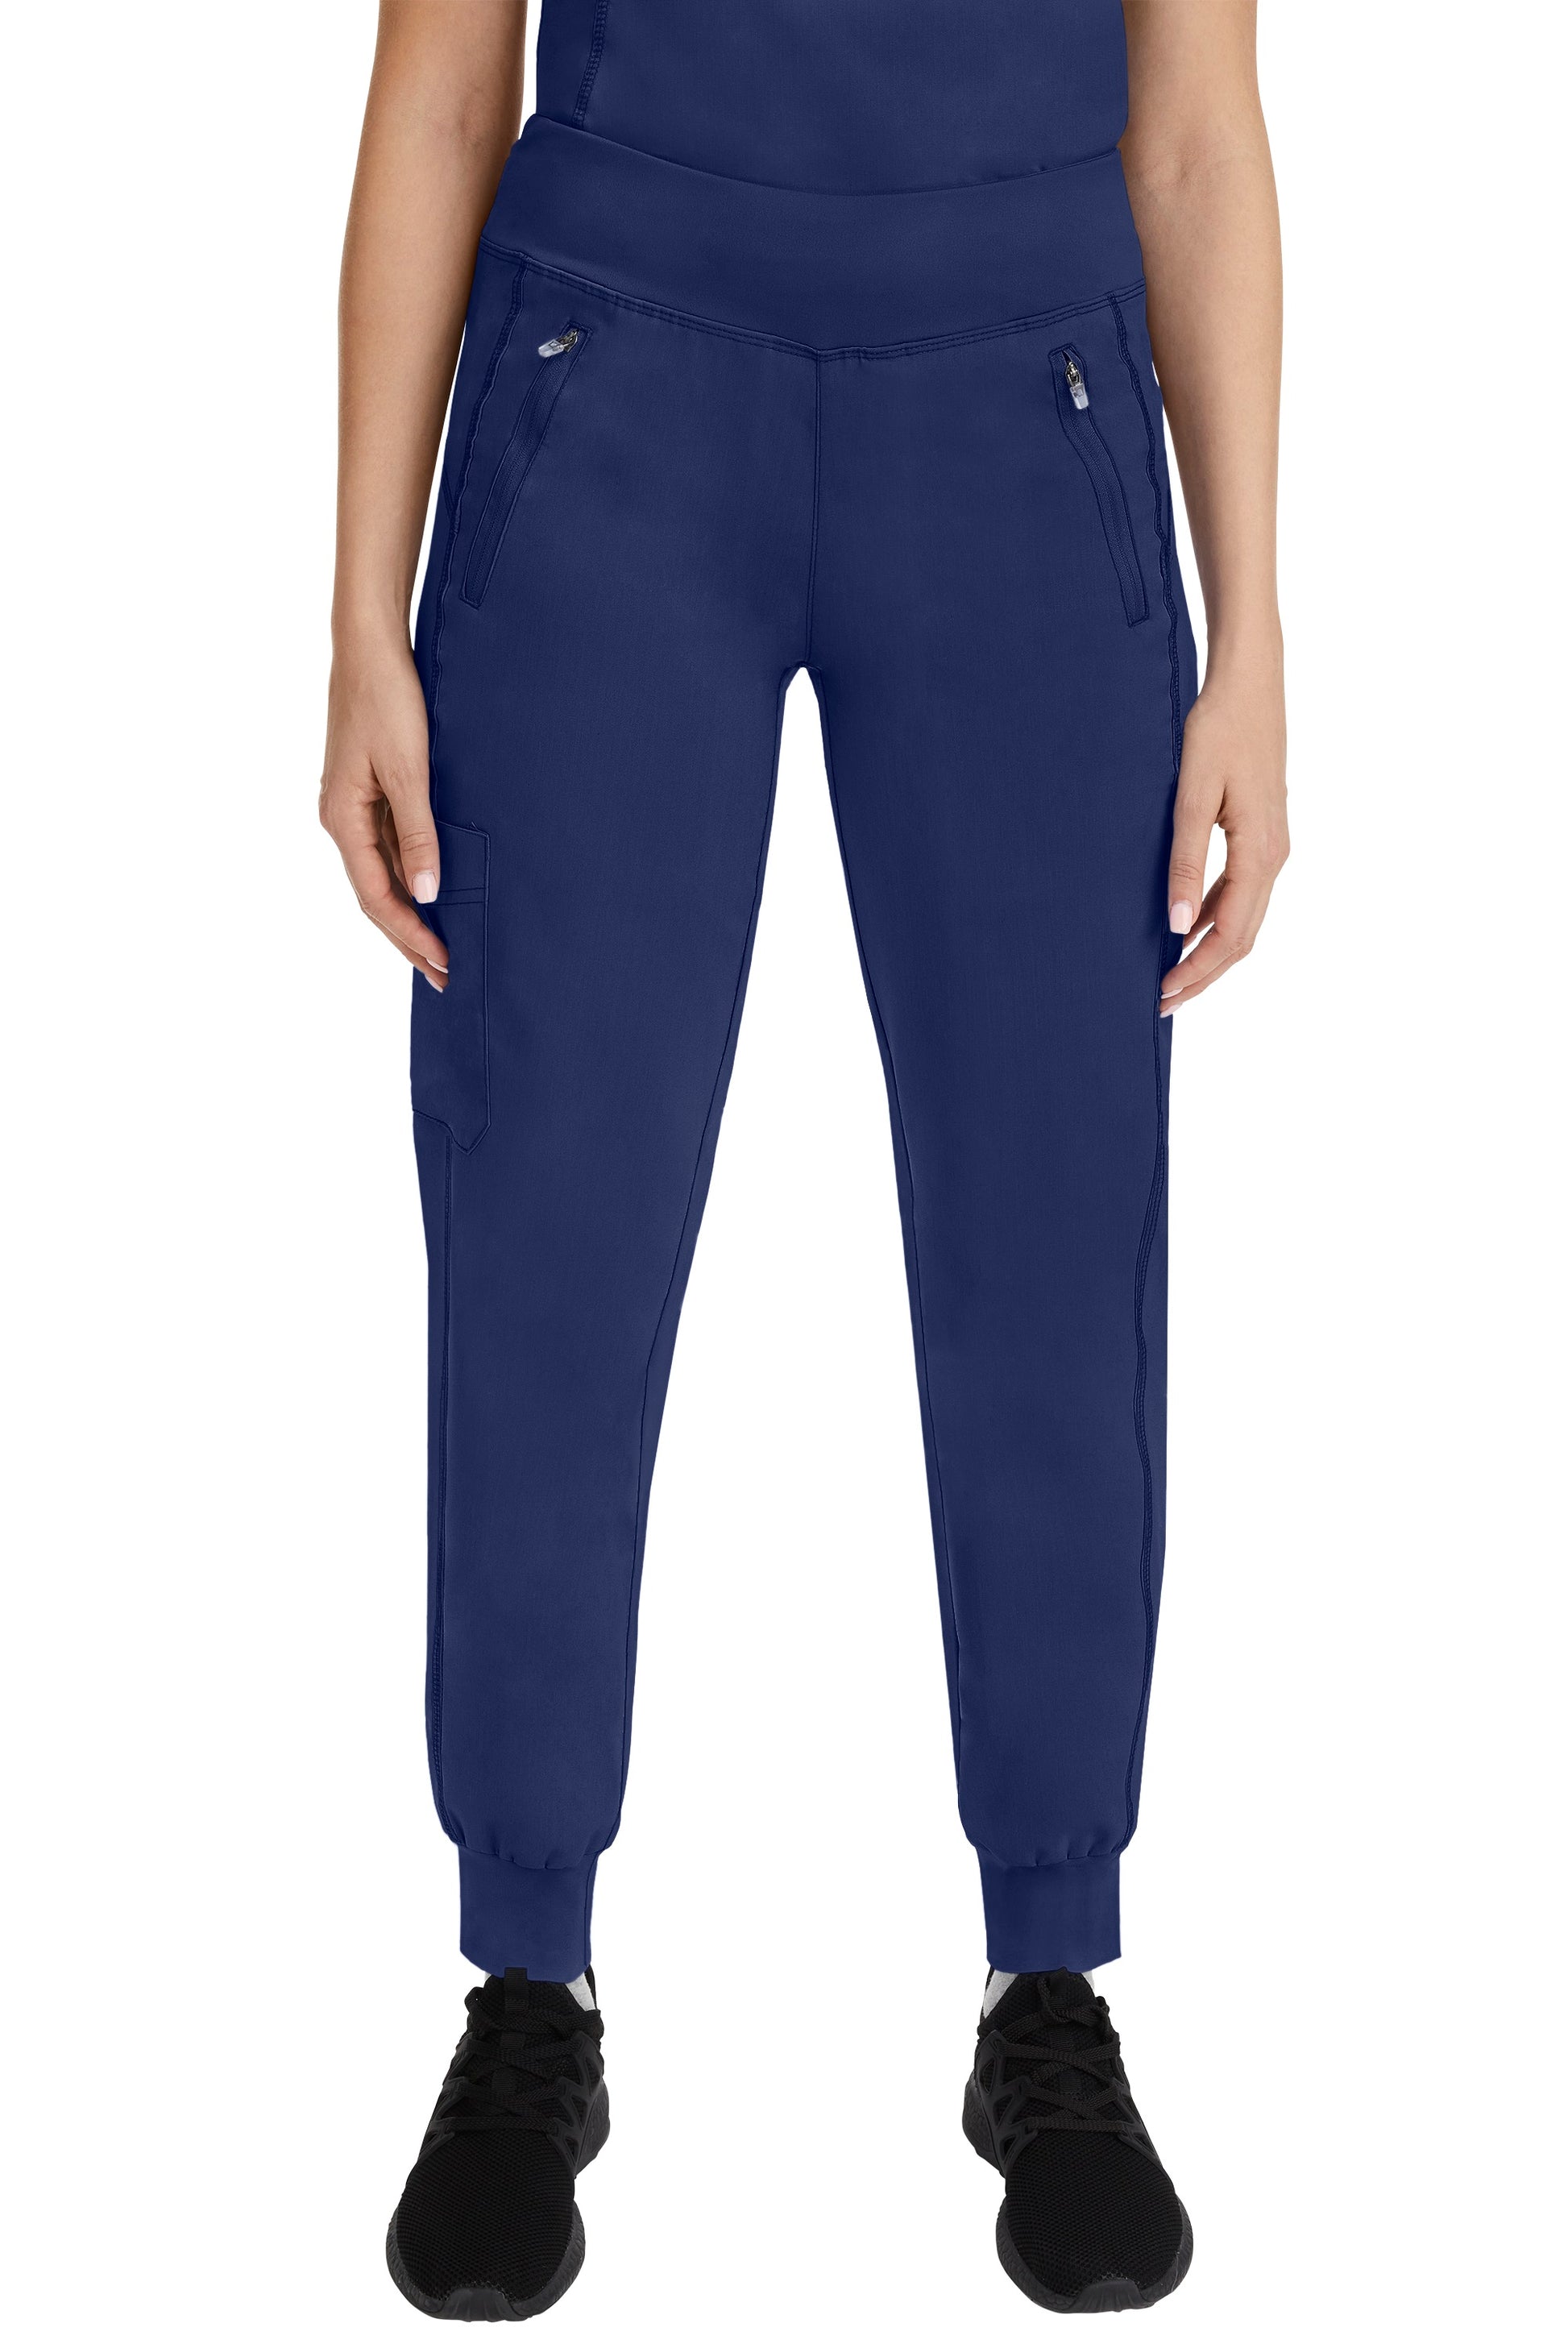 Healing Hands Purple Label Yoga Tara Jogger Scrub Pant in Navy at Parker's Clothing and Shoes.